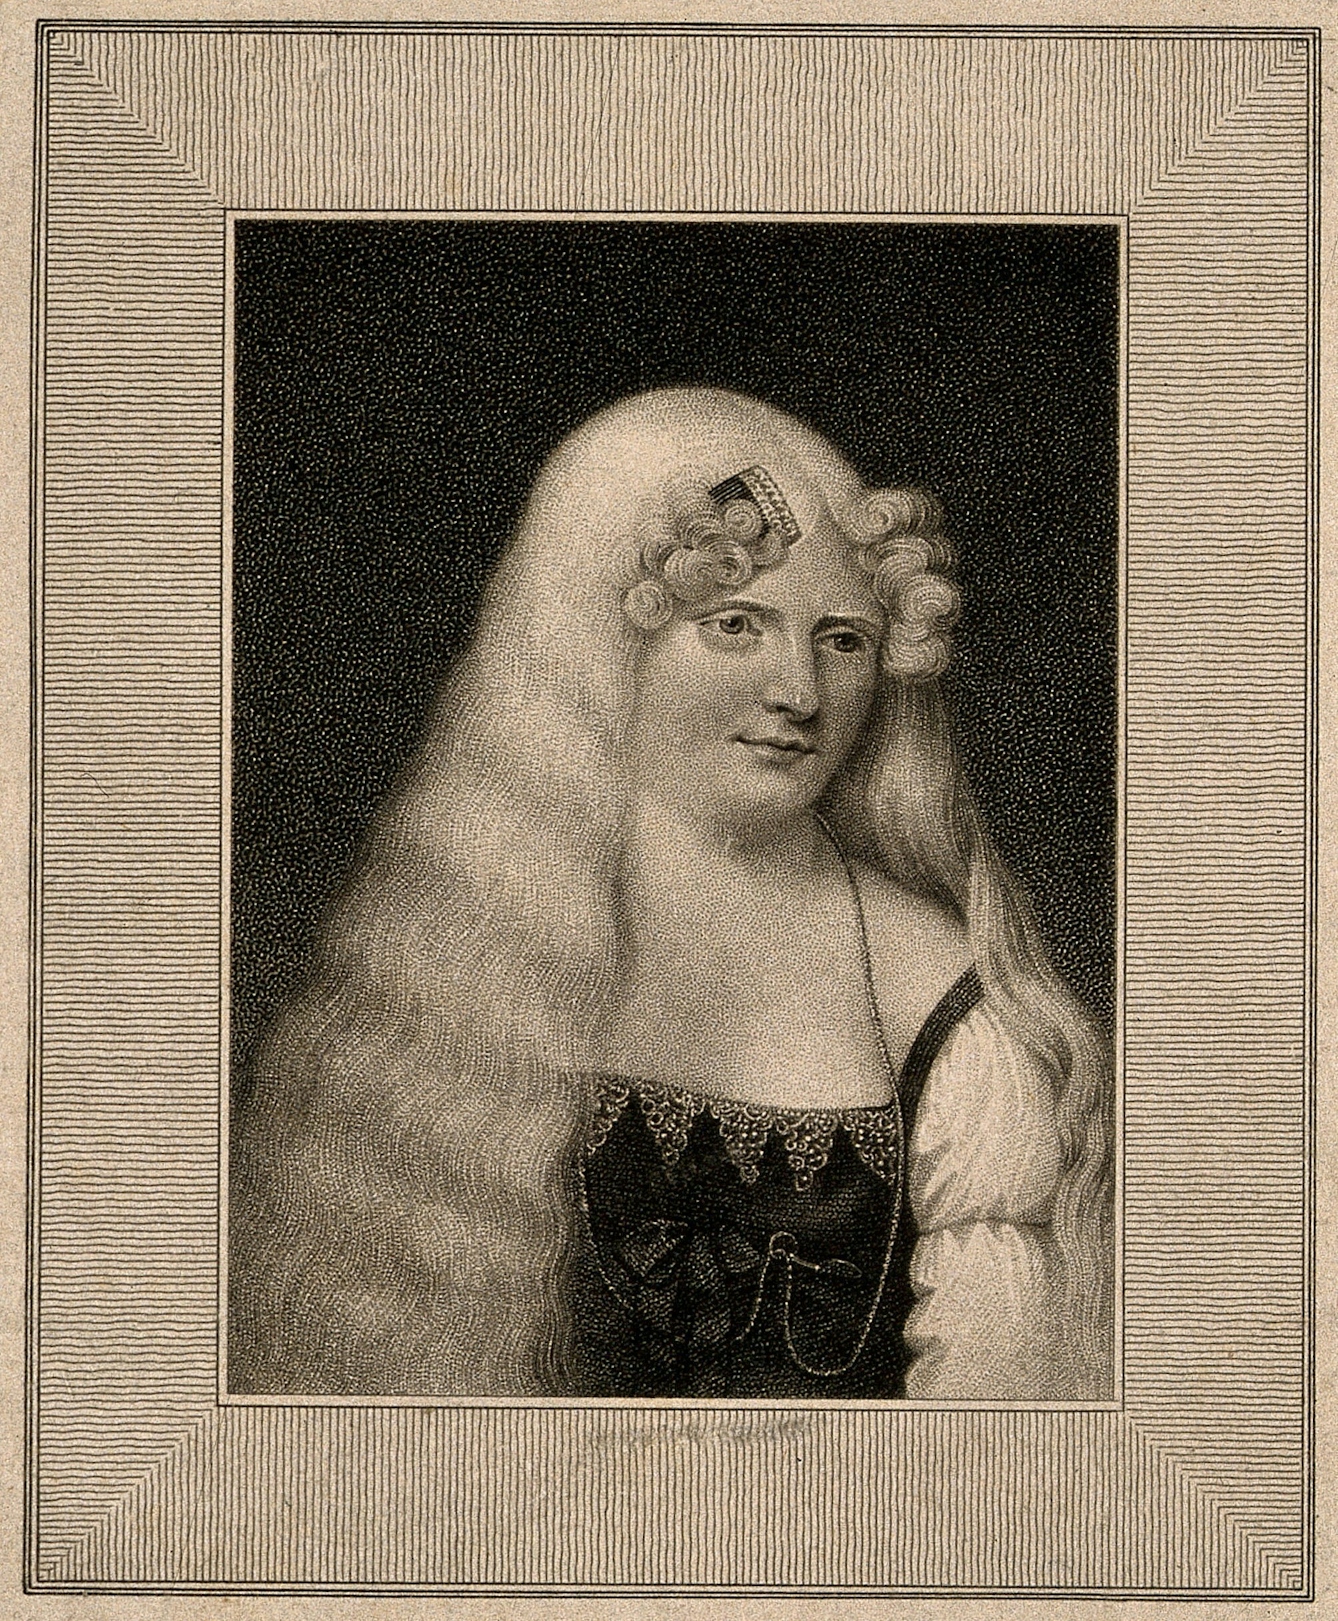 Portrait showing the head and shoulders of a young woman with long white hair and pale skin. She is wearing a dress with a black bodice and white sleeves, and has a decorative comb in her hair.